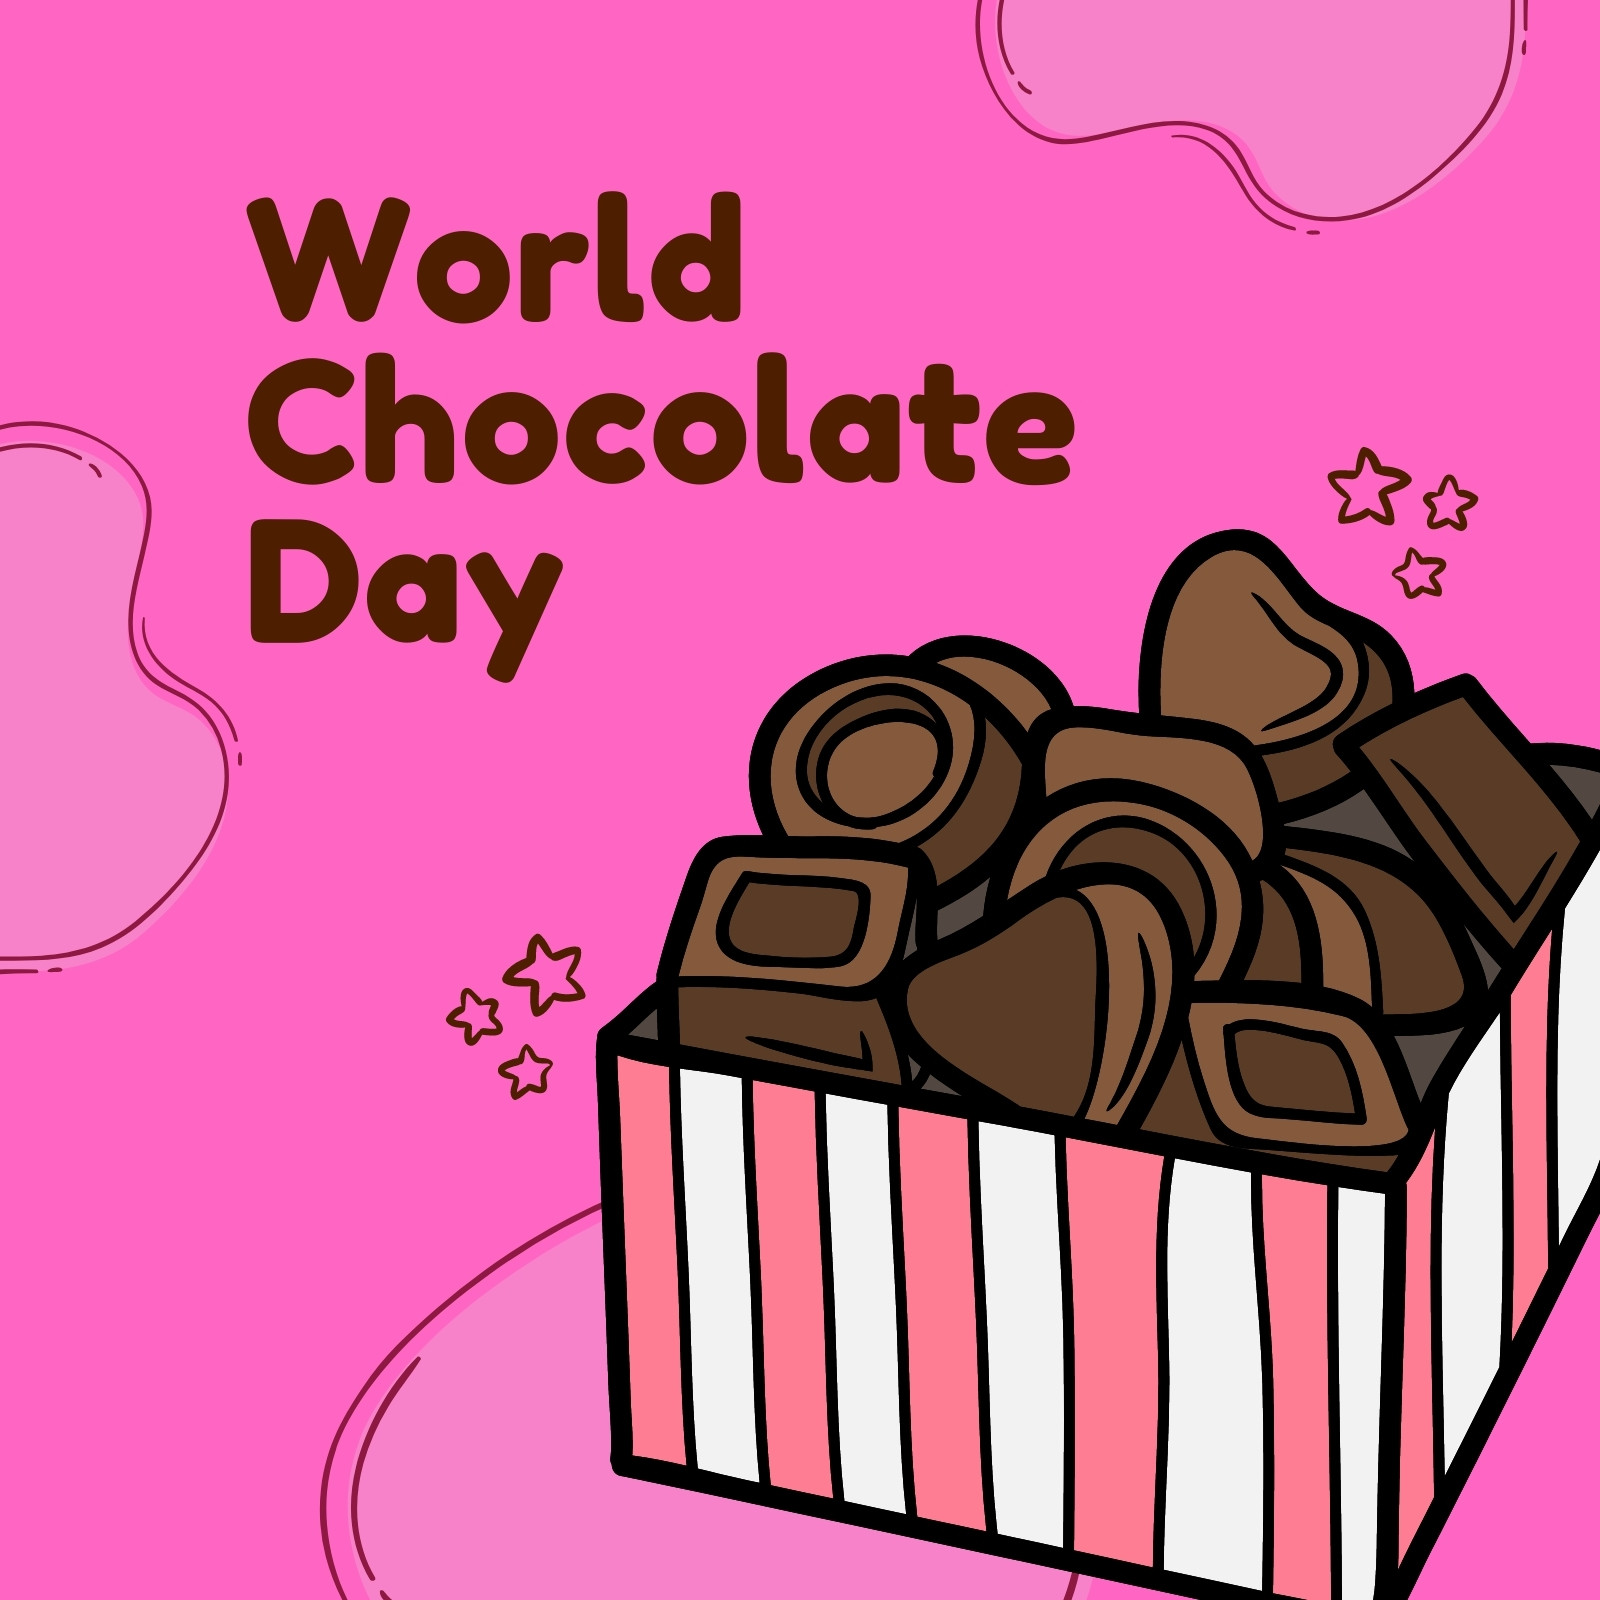 Chocolate day special - Sketch any thing with color pencils | Facebook